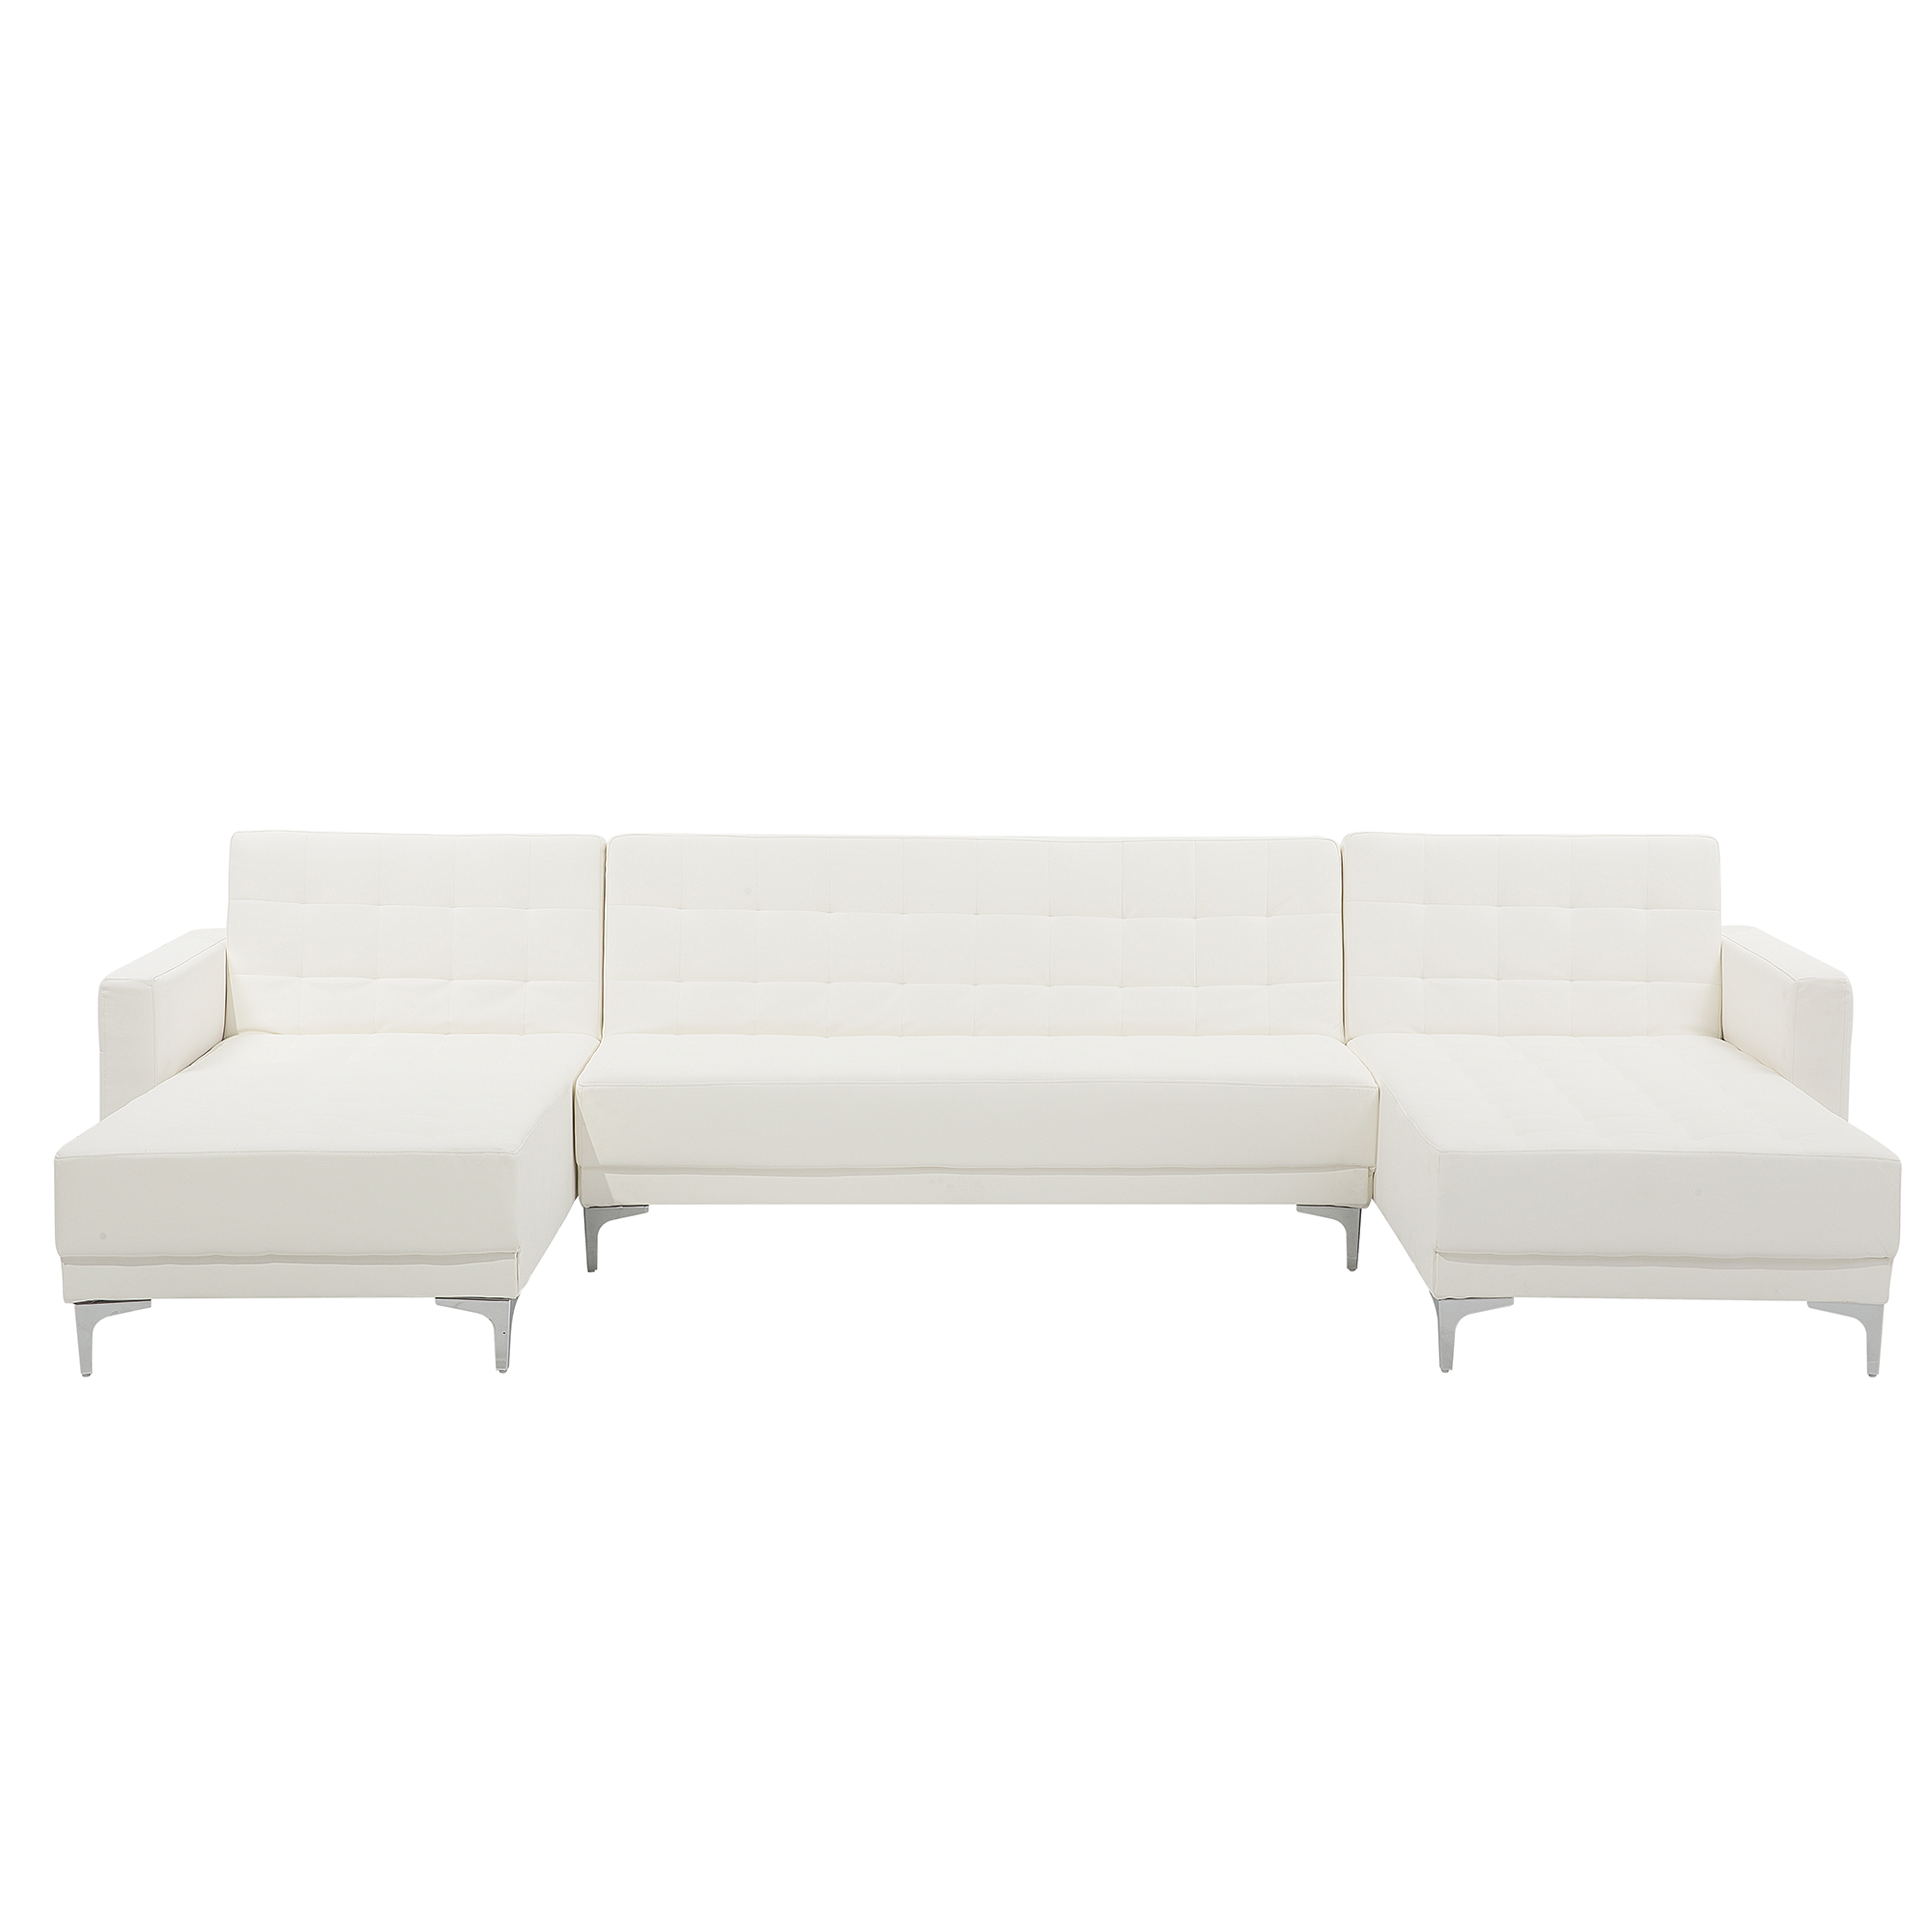 Beliani Corner Sofa Bed White Faux Leather Tufted Modern U-Shaped Modular 5 Seater with Chaise Longues